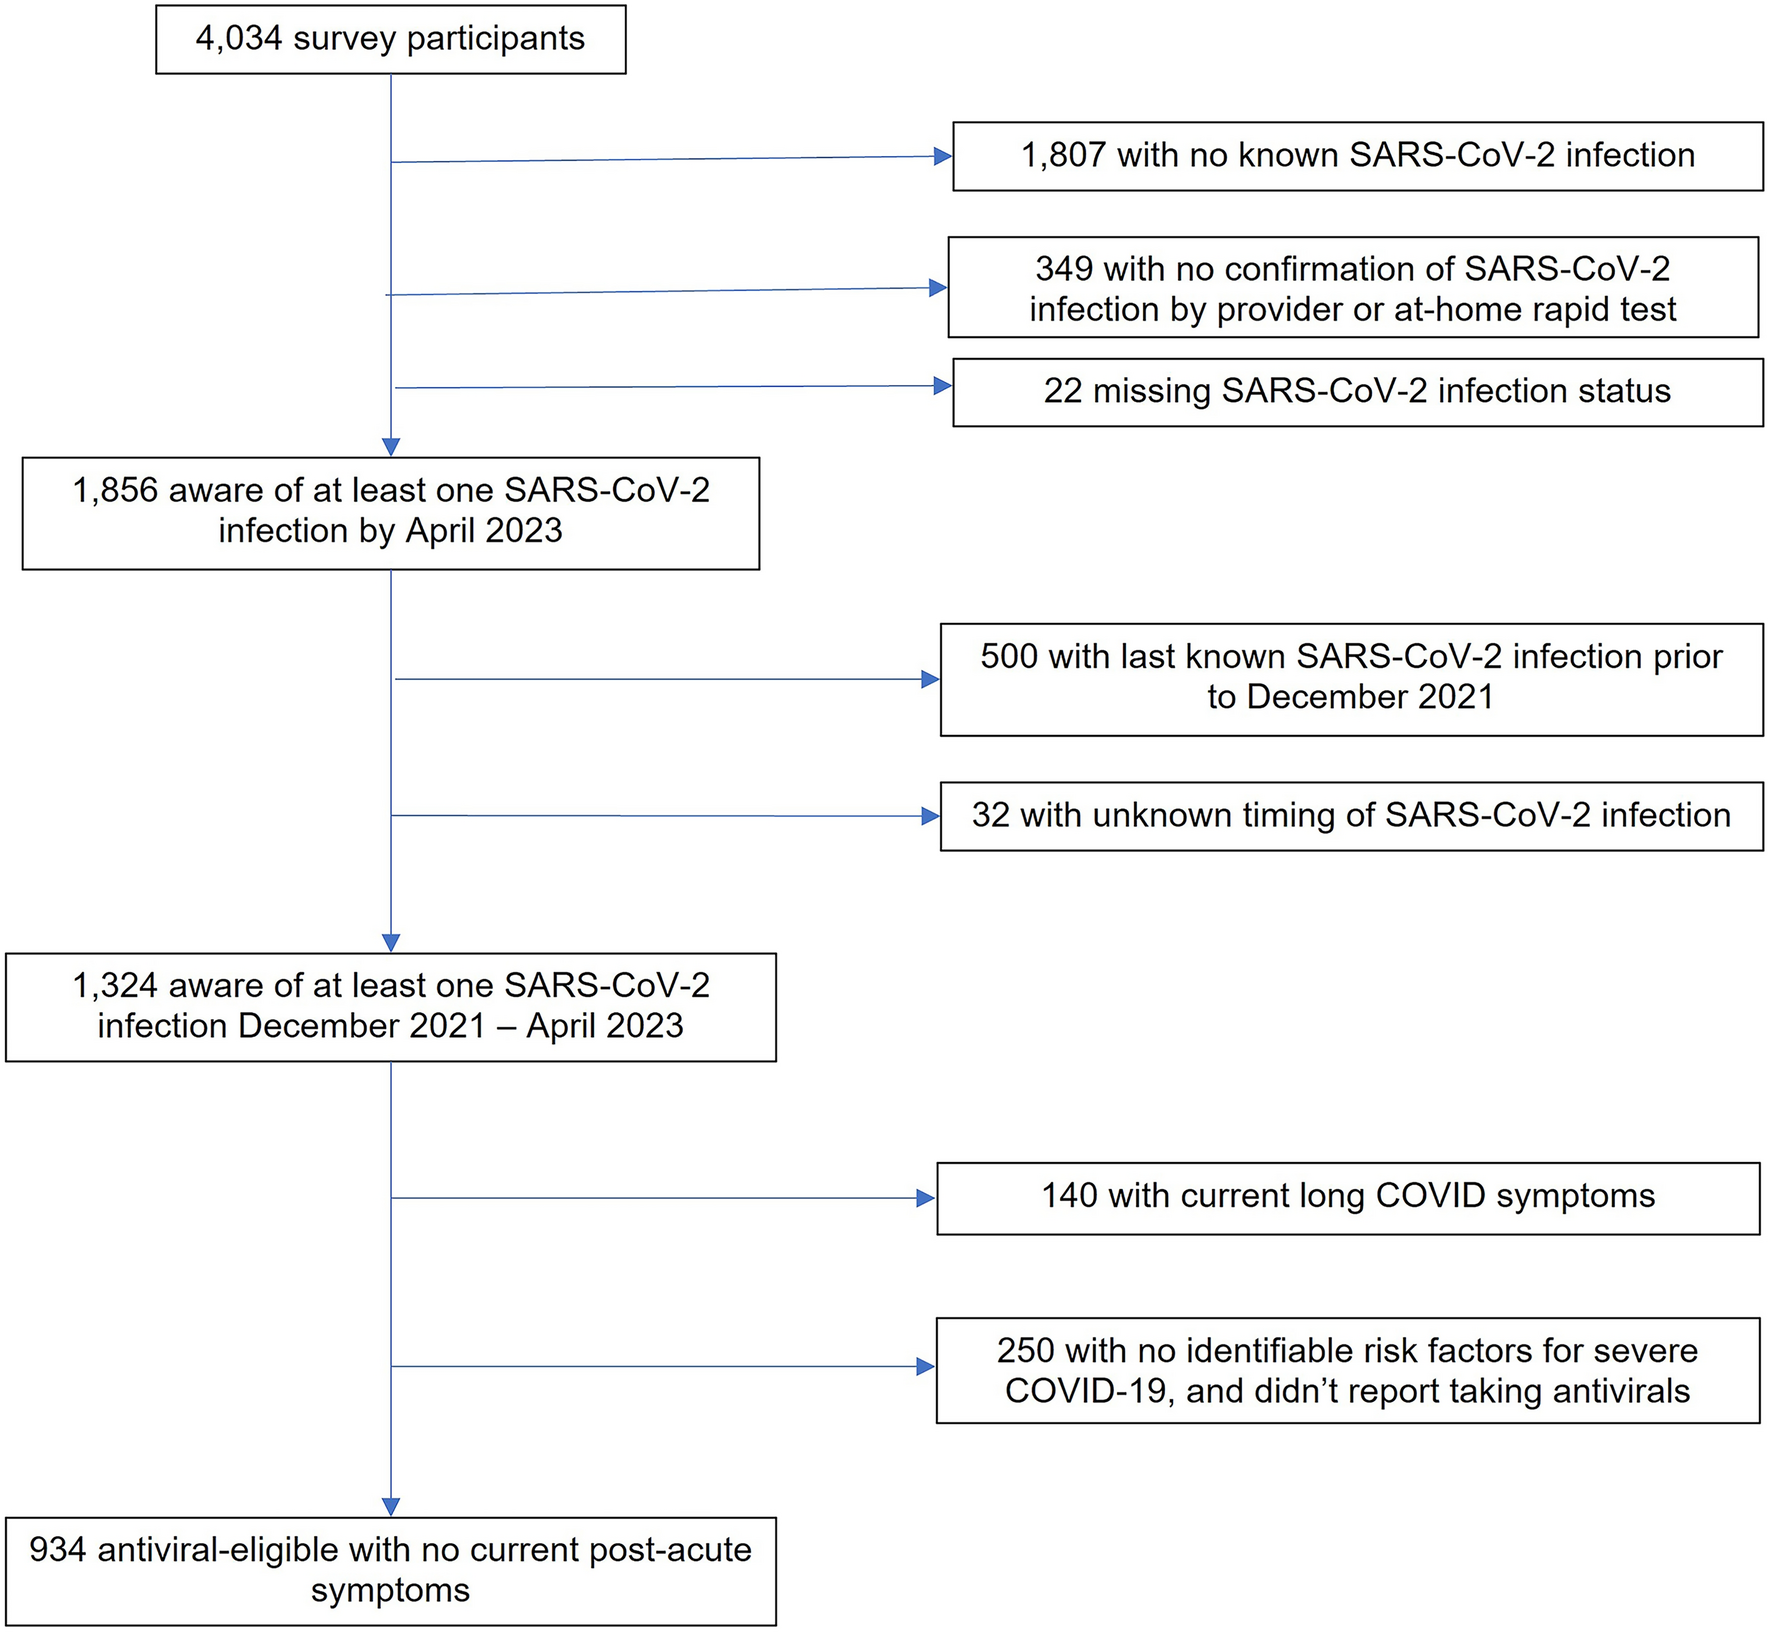 Perceived Risk for Severe COVID-19 and Oral Antiviral Use Among Antiviral-Eligible US Adults